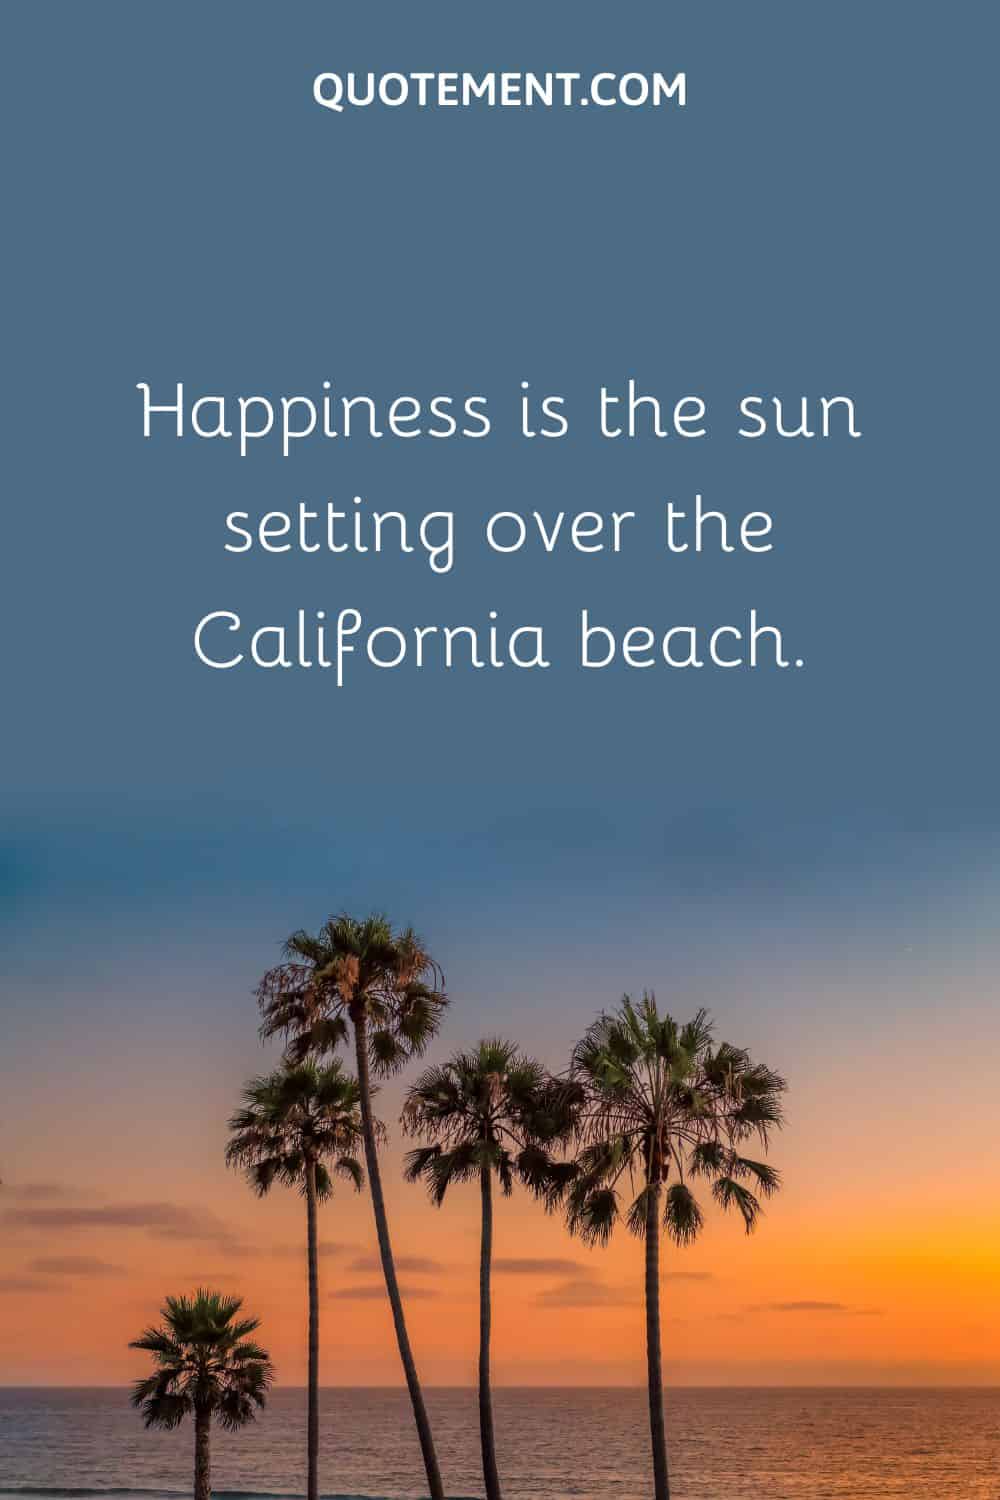 Happiness is the sun setting over the California beach